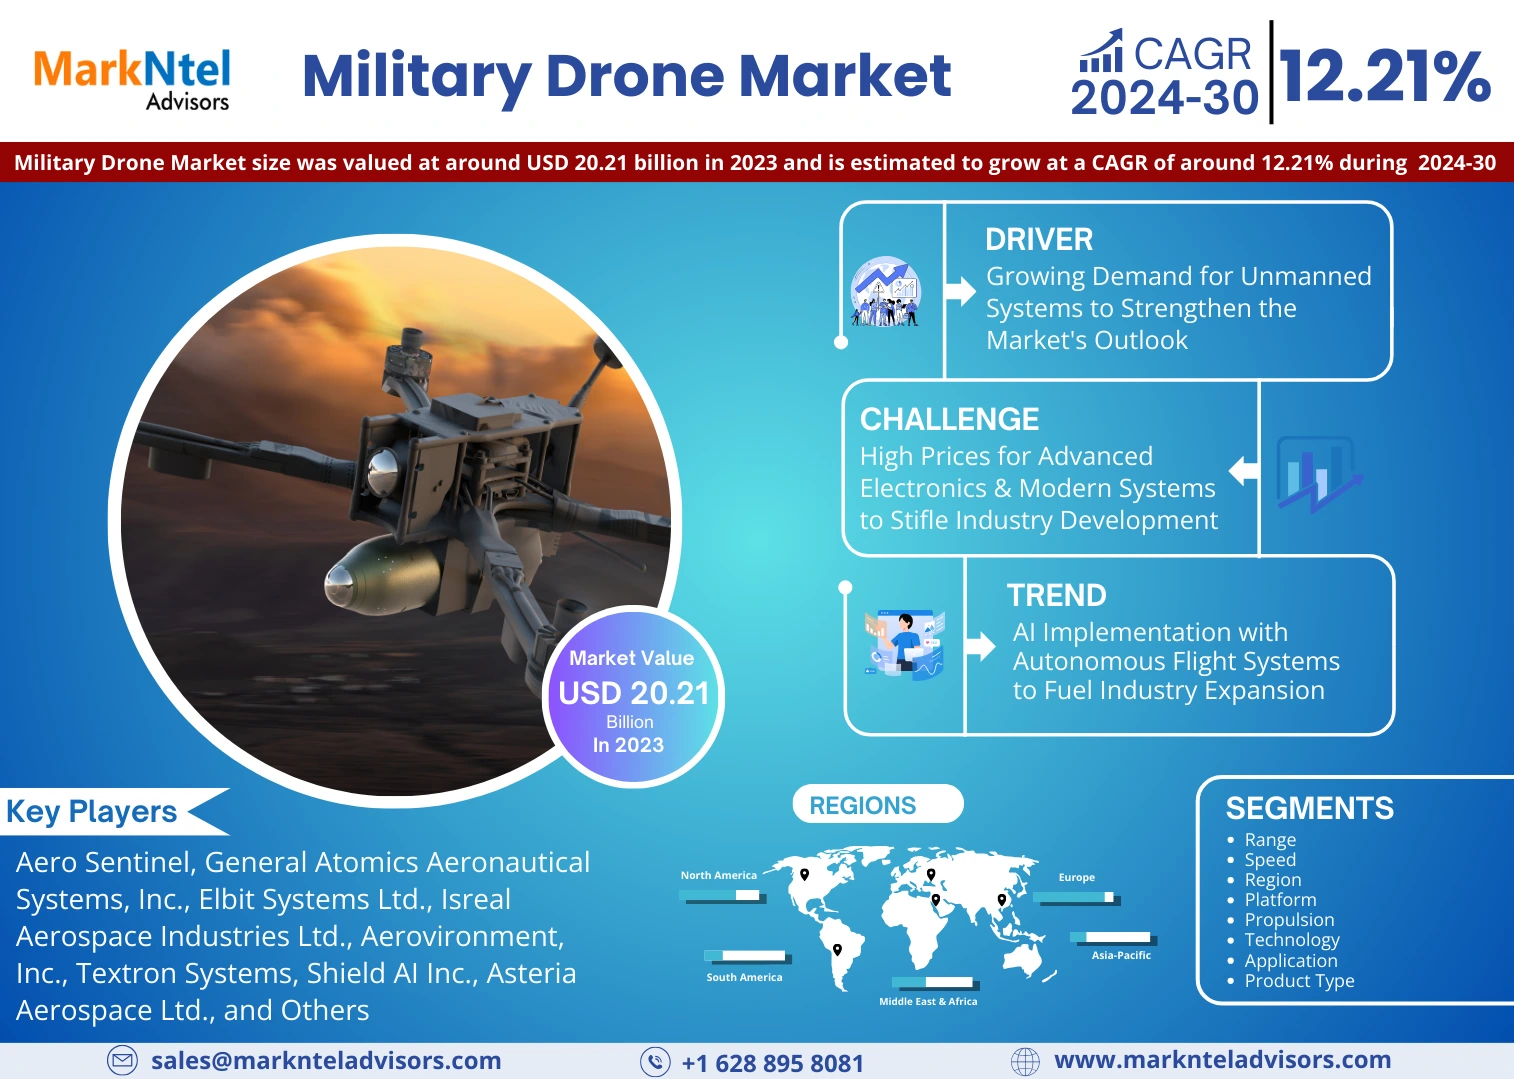 Global Military Drone Market Research Report: Forecast (2024-2030)